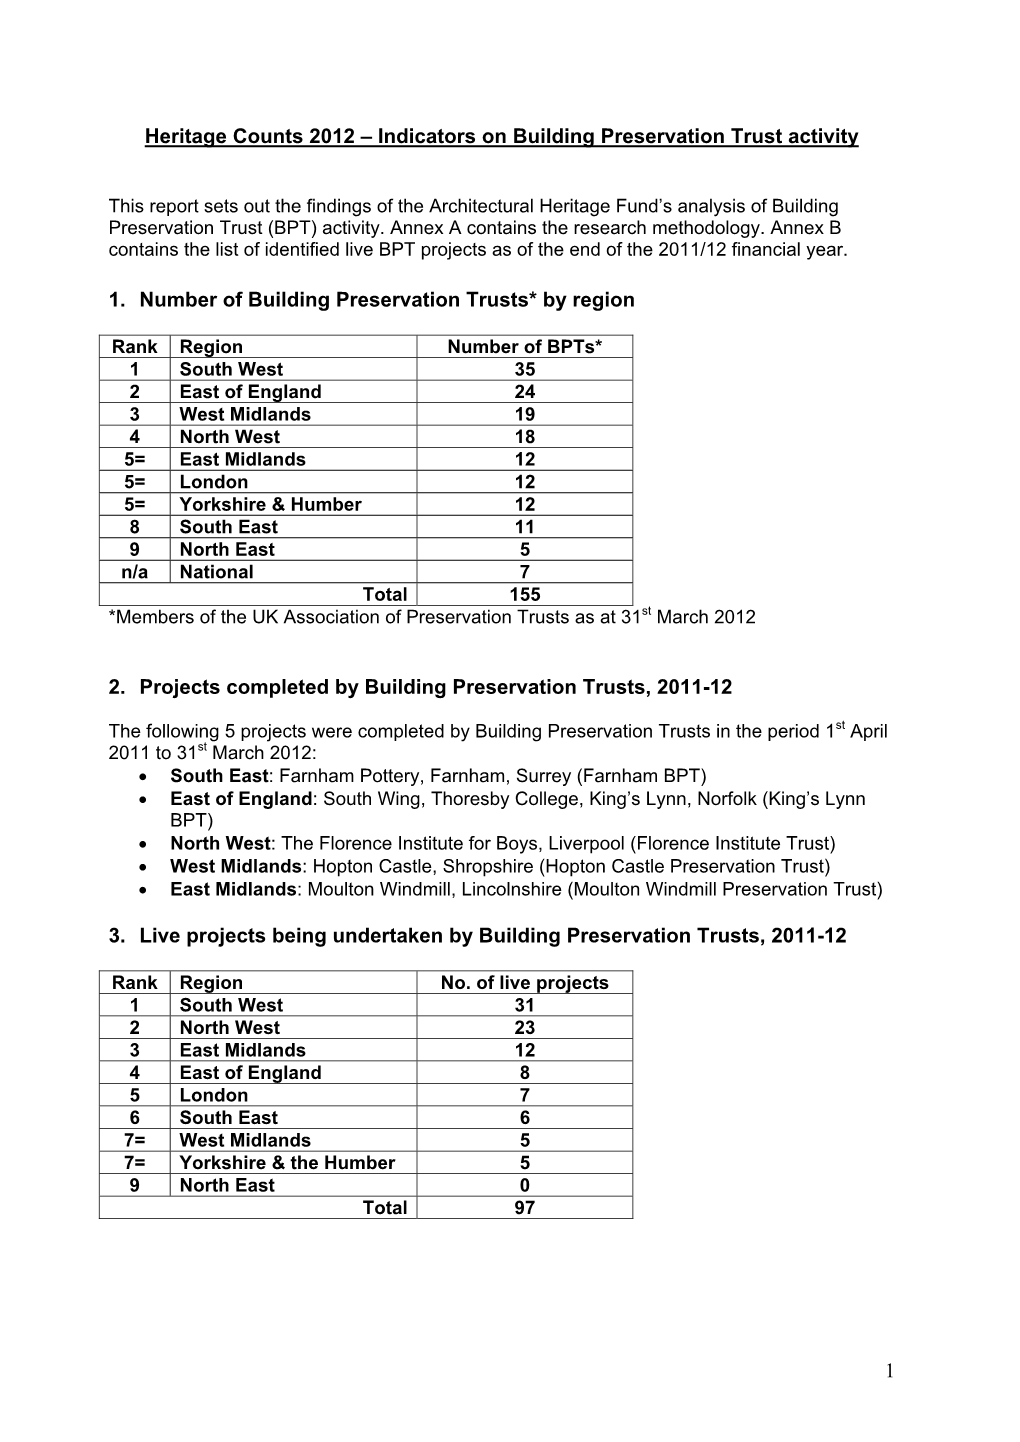 Heritage Counts 2012 – Indicators on Building Preservation Trust Activity